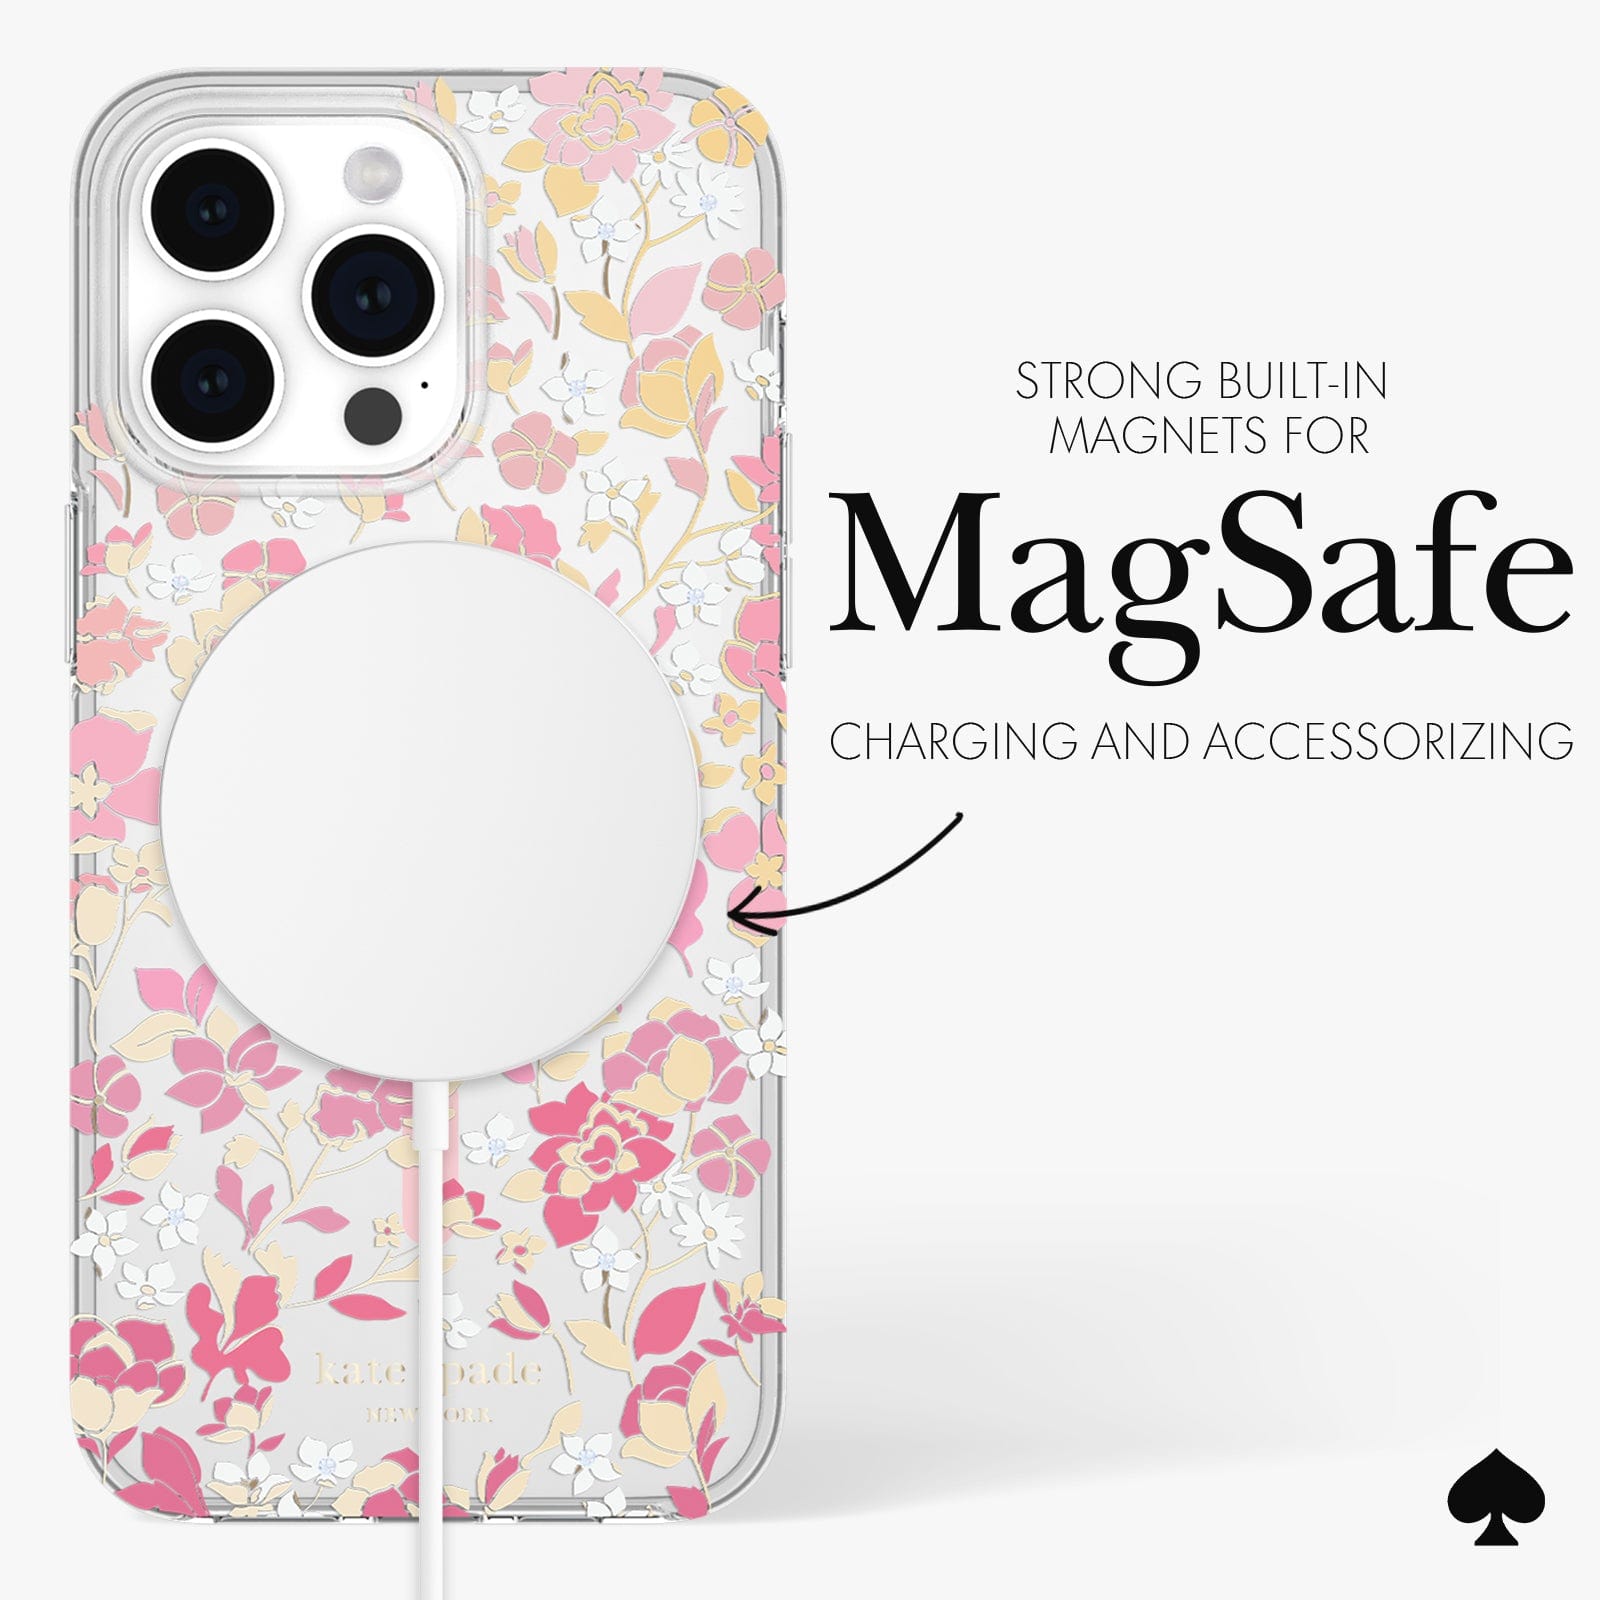 STRONG BUILT IN MAGNETS FOR MAGSAFE CHARGING AND ACCESSORIZING.